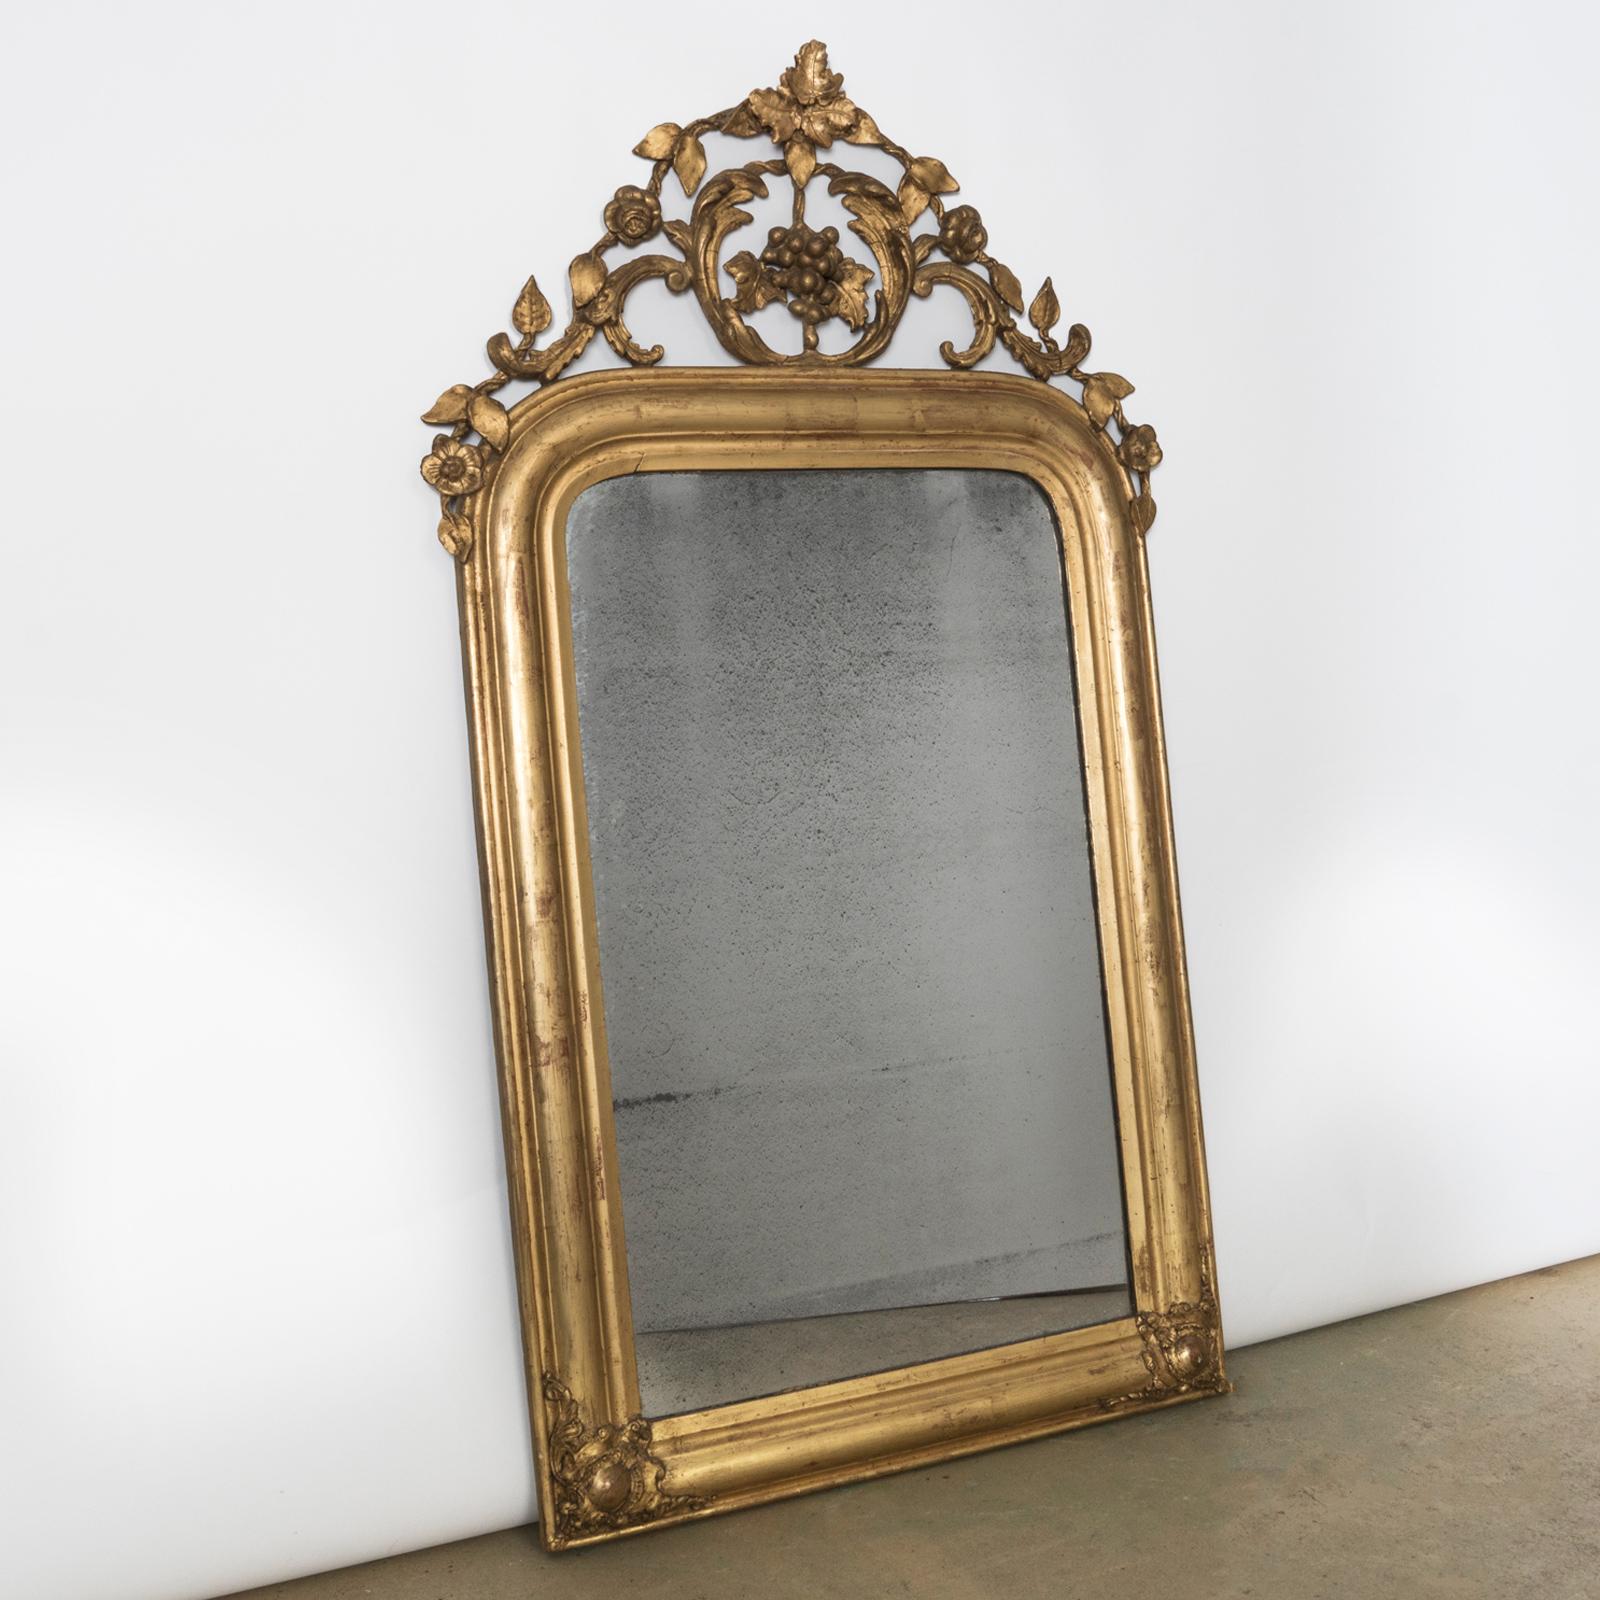 Exquisite 19th Century Louis Philippe Mirror in Gold Gilt, showcasing a captivating ornate cartouche adorned with intricate foliage and grape motifs. France, circa 1850 - 1880s.

This stunning antique French mirror boasts the characteristic rounded